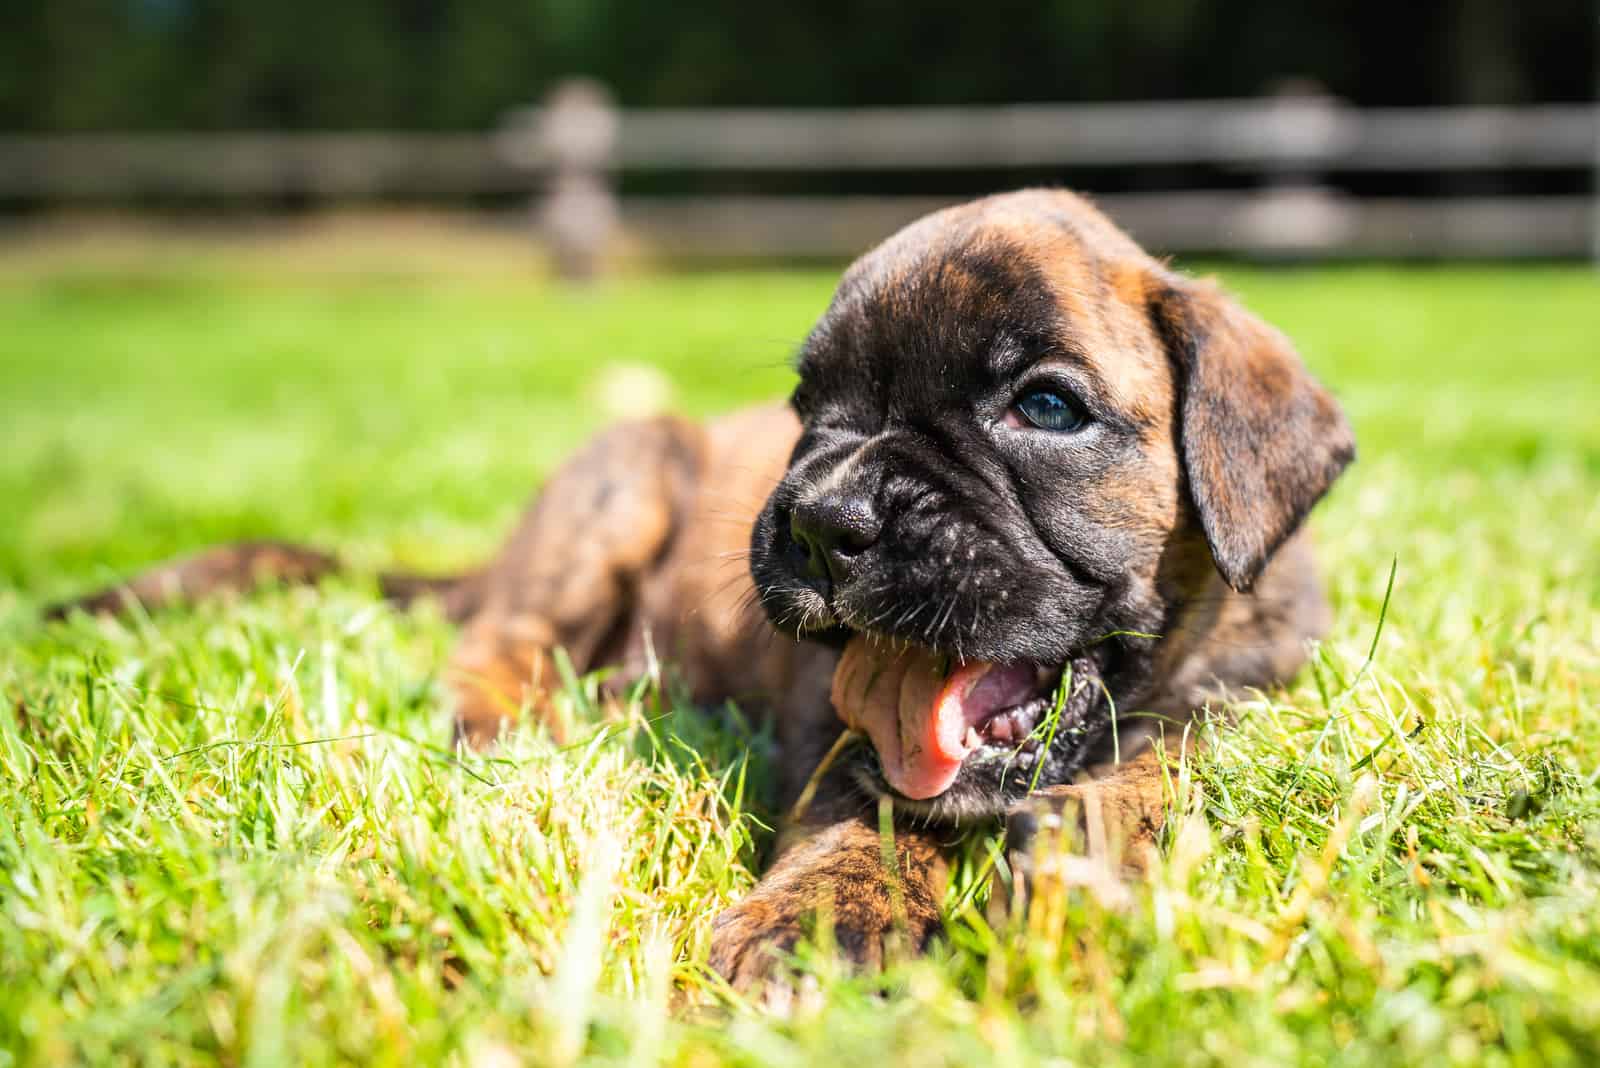 Cute boxer puppy on the green grass